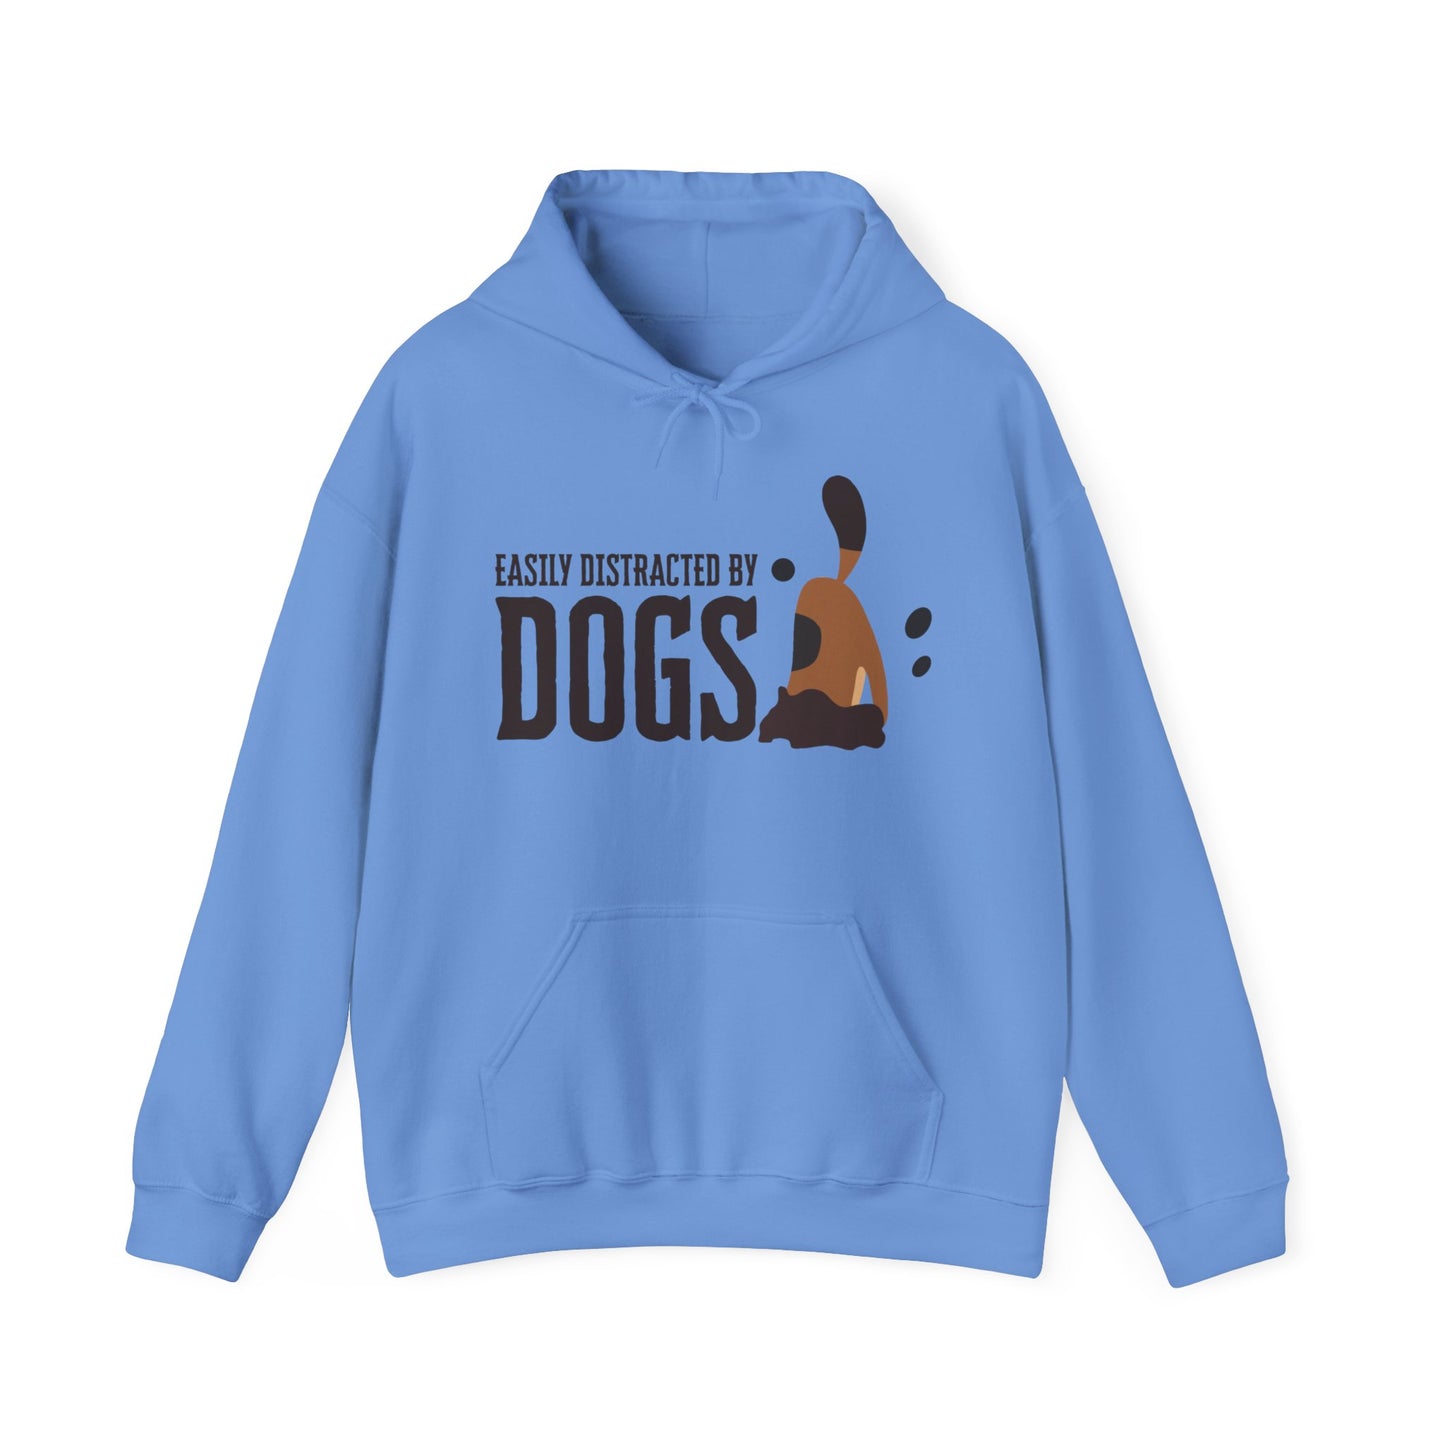 Against a white backdrop, a ‘Dogs Pure Love, Dog Dig’ unisex Carolina blue hooded sweatshirt highlights the slogan ‘Easily Distracted by Dogs,’ and a dog digging graphic.